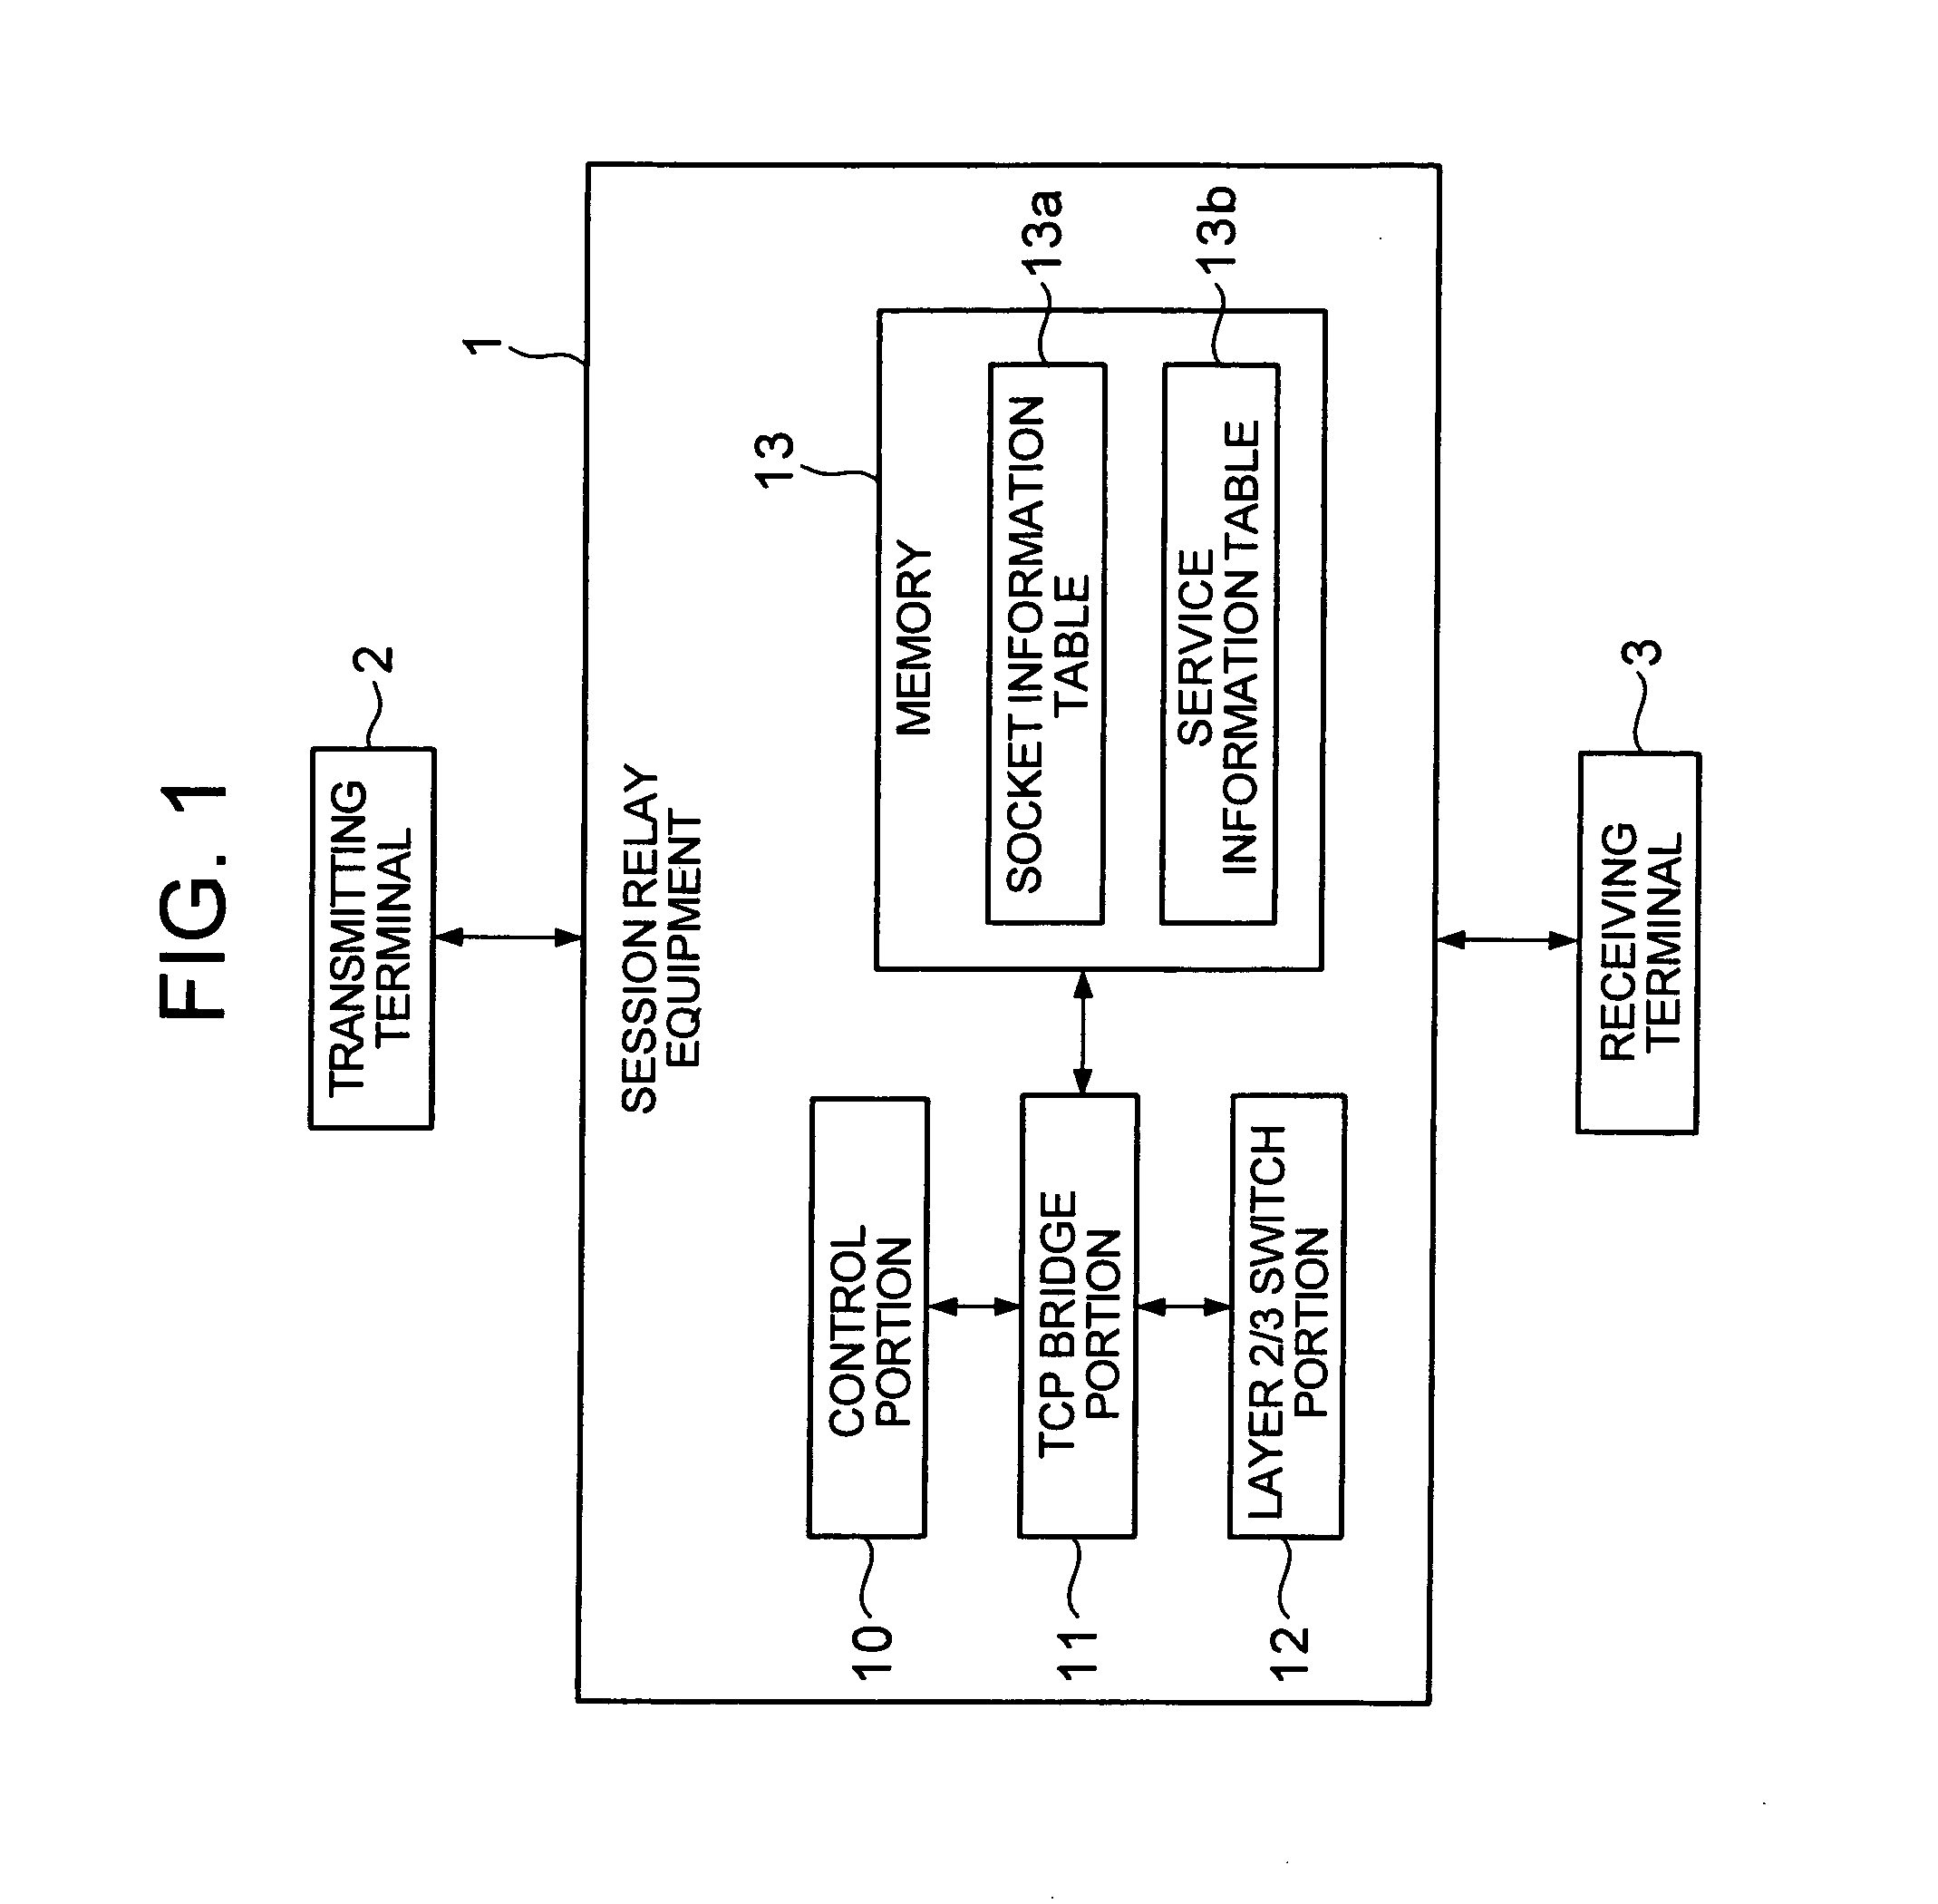 Session relay equipment and session relay method